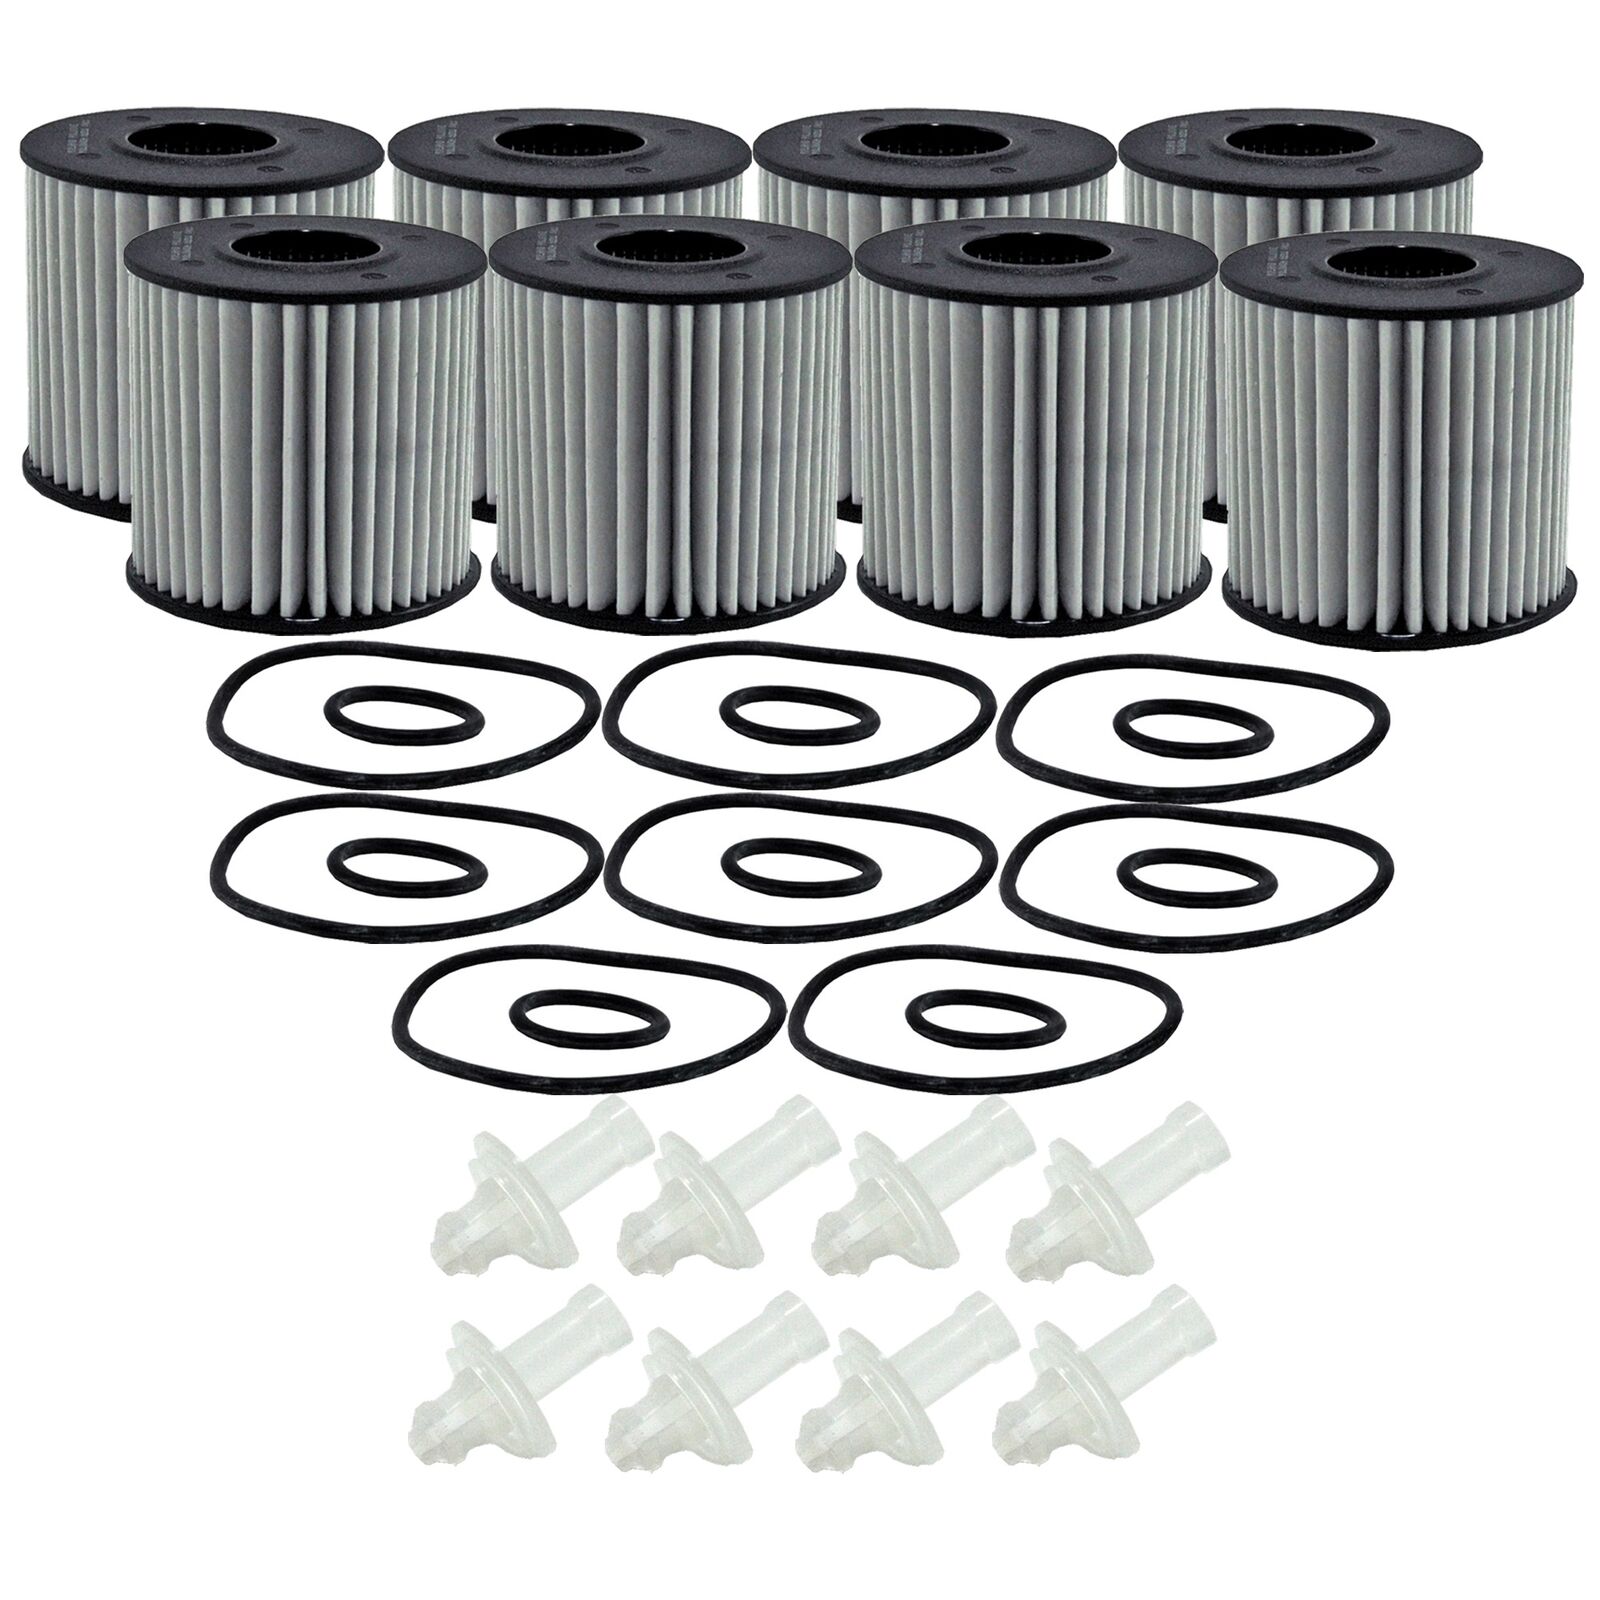 Wix XP Set of 8 Engine Motor Oil Filters (Metal Free) For Lexus Scion Toyota